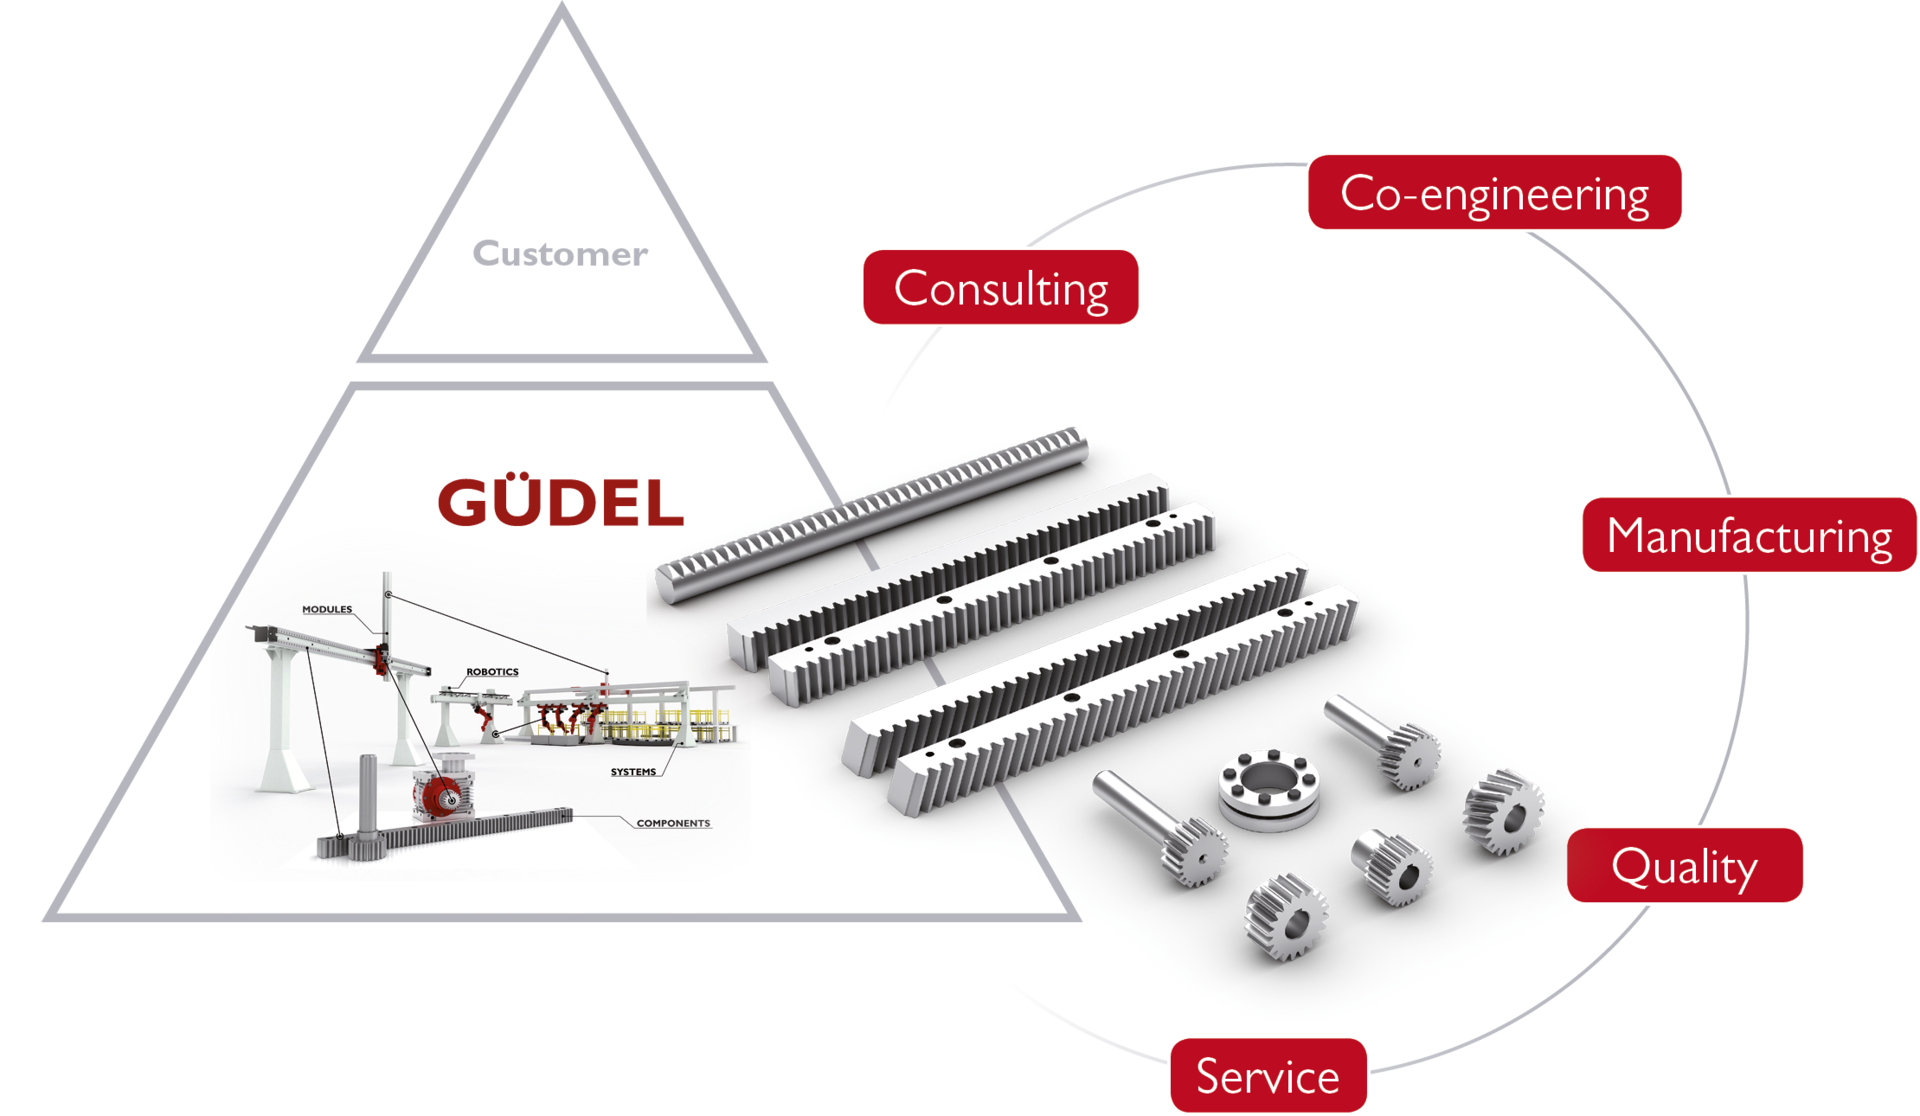 The optimum drive chain for the highest efficiency and reliability | © Güdel Group AG